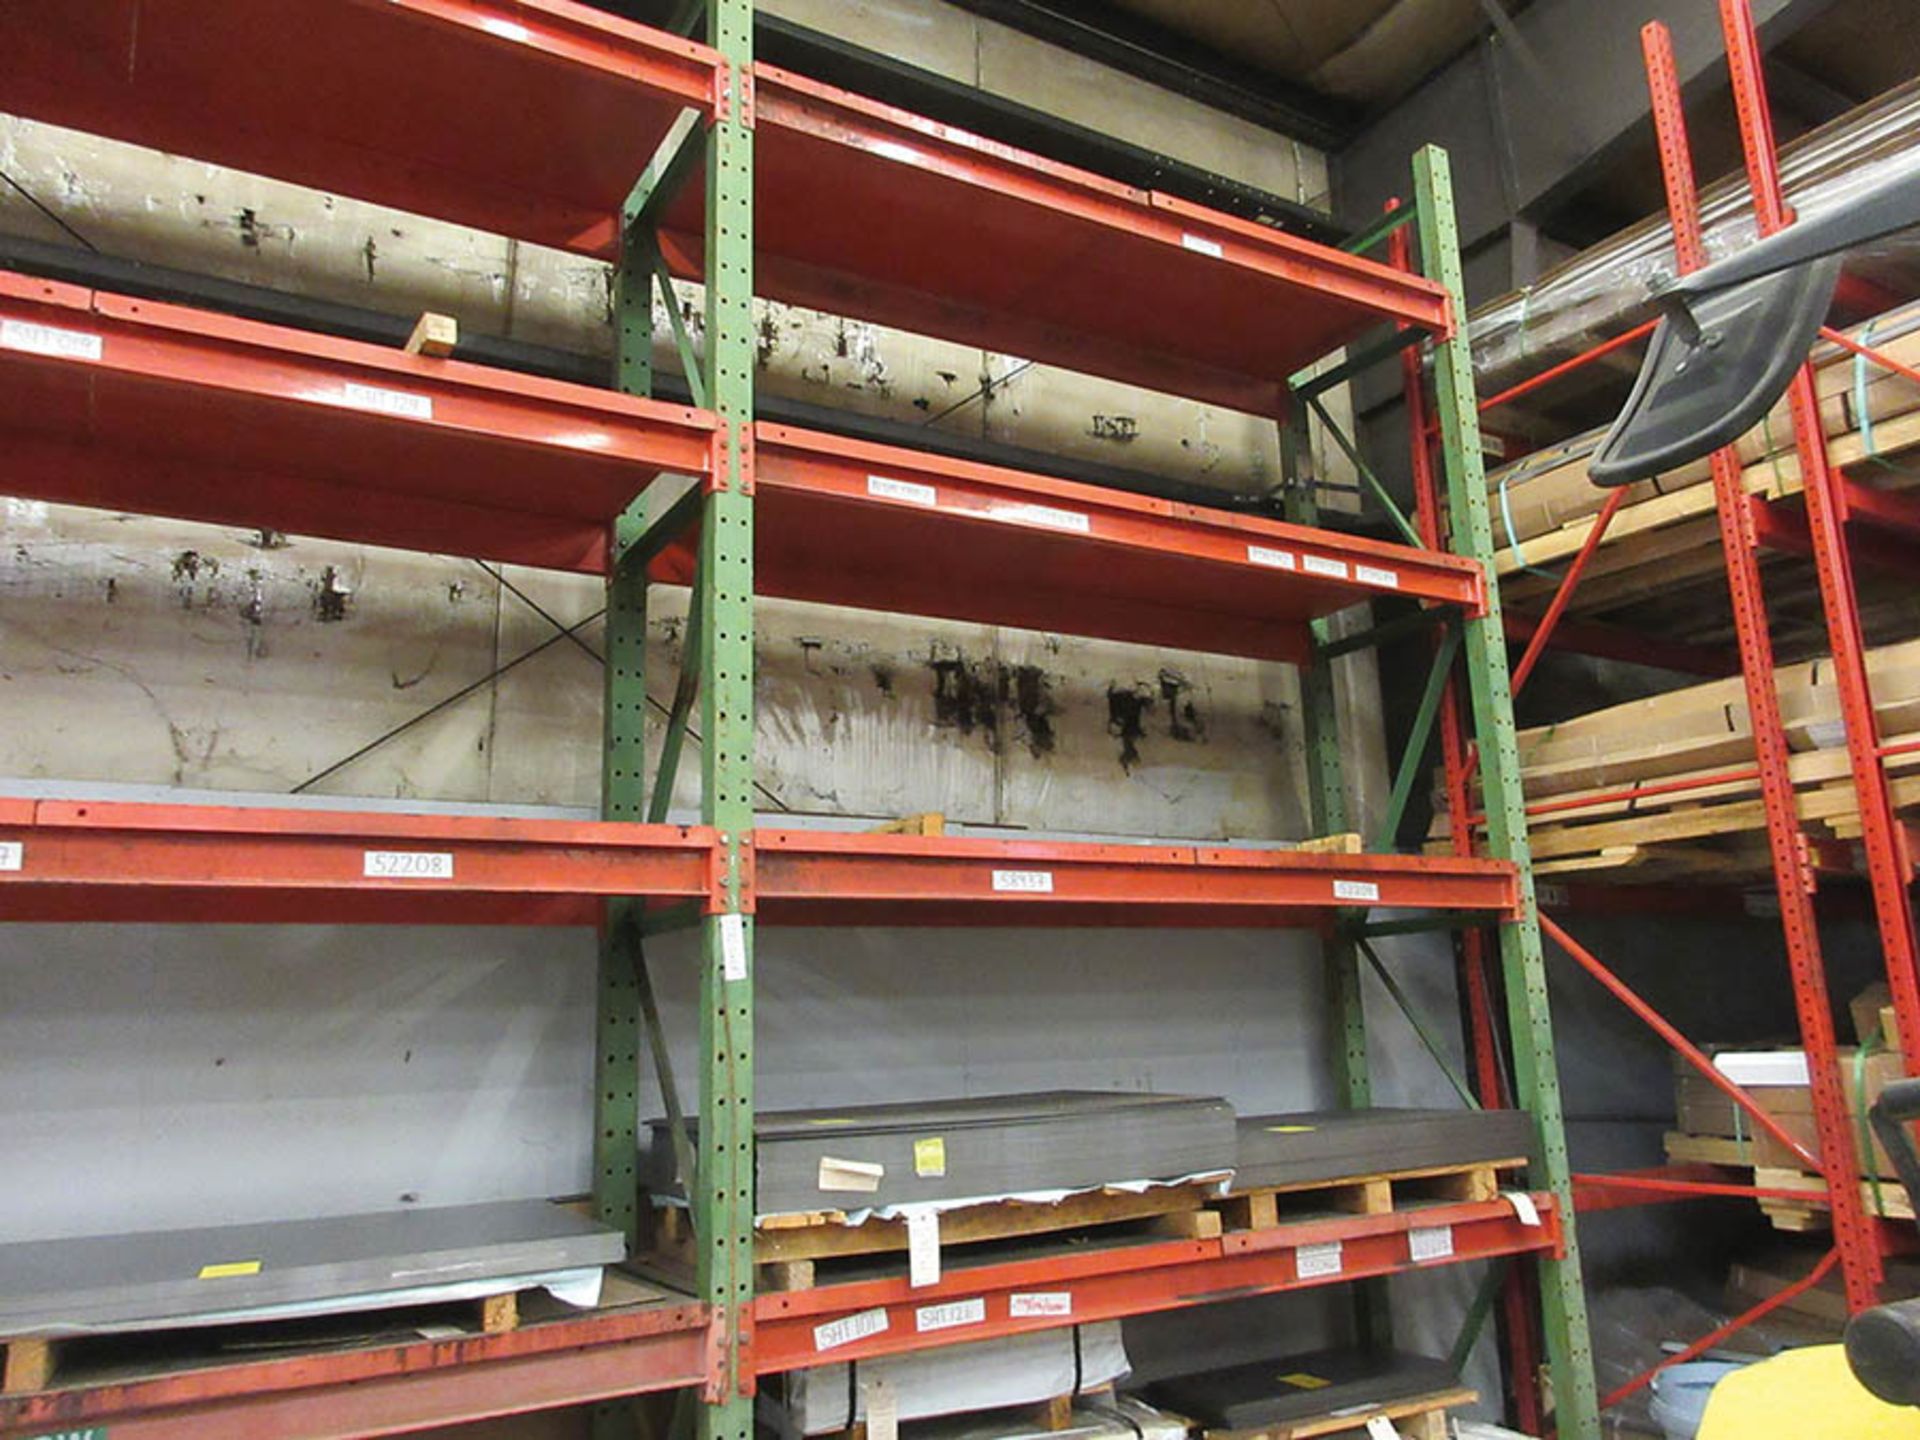 (2) SECTIONS OF BOLT-STYLE PALLET RACK: (3) 16' X 36'' UPRIGHTS AMD (16) 9' X 6'' CROSSBEAMS